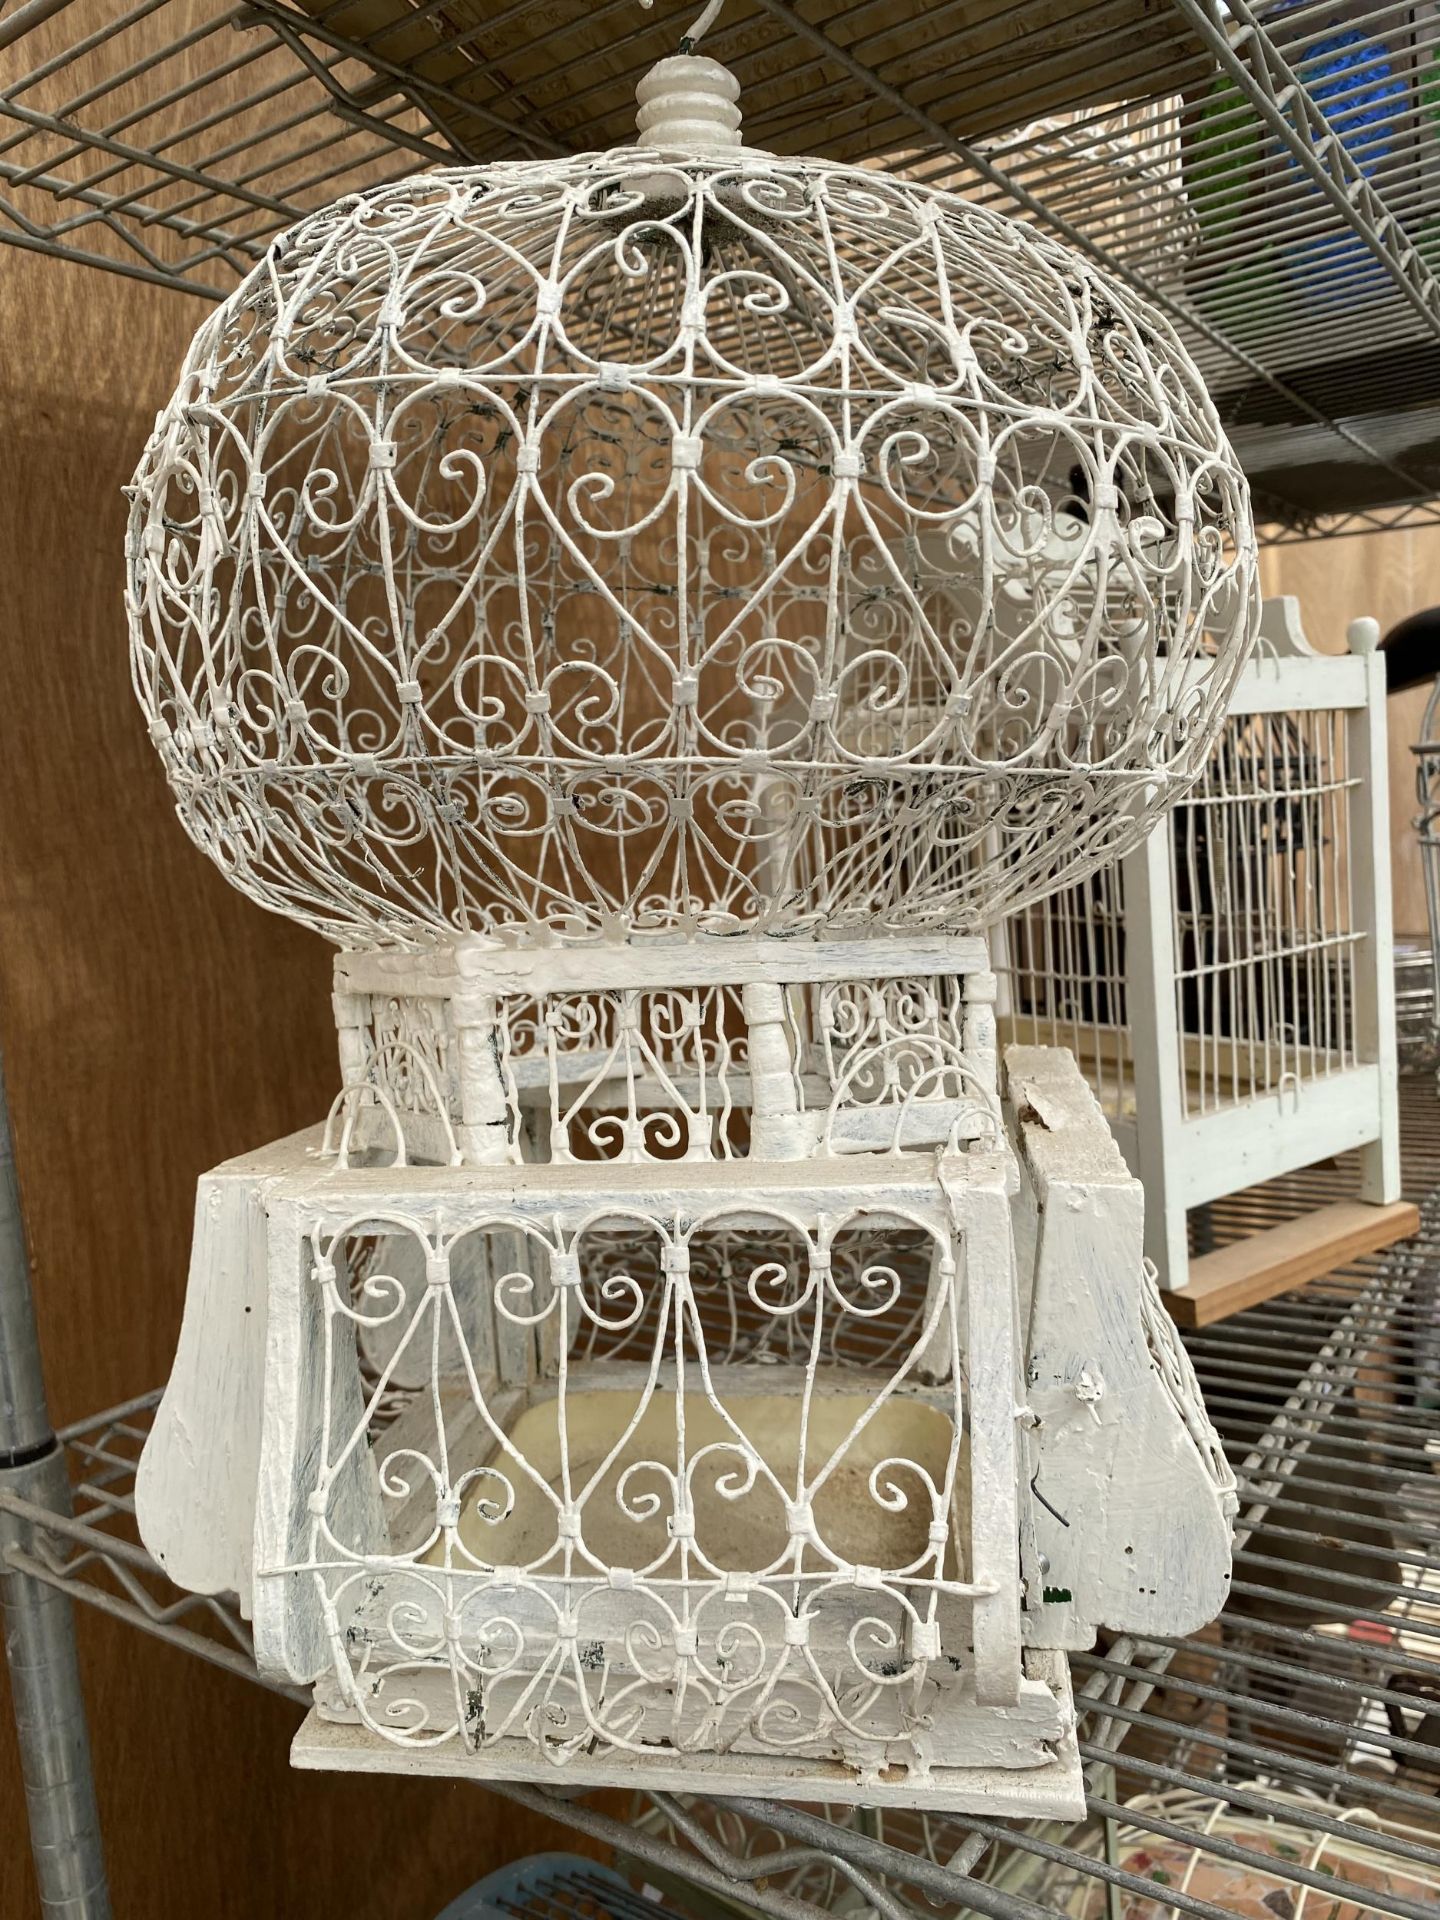 TWO DECORATIVE WOODEN AND METAL BIRD CAGES - Image 5 of 5